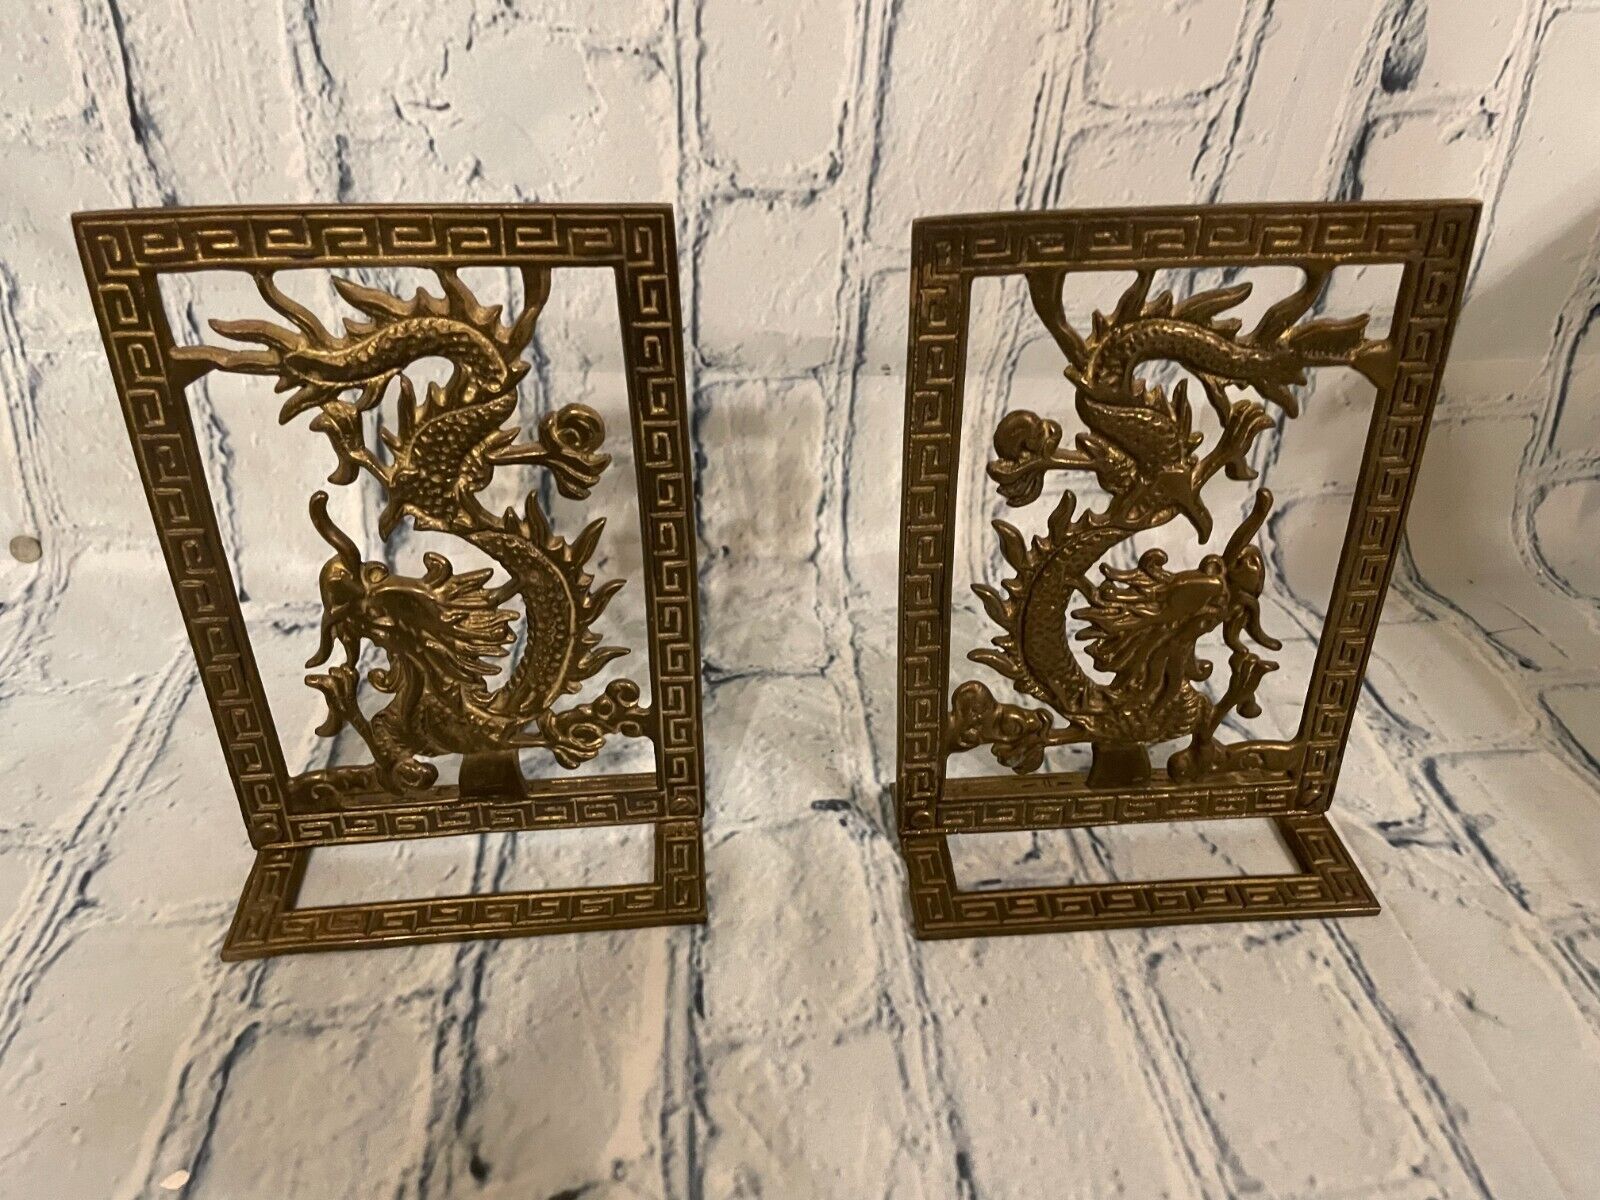 Chinese Japan Dragon Brass Bookends Mid Century Sculpture Statue Mcm Eames Era